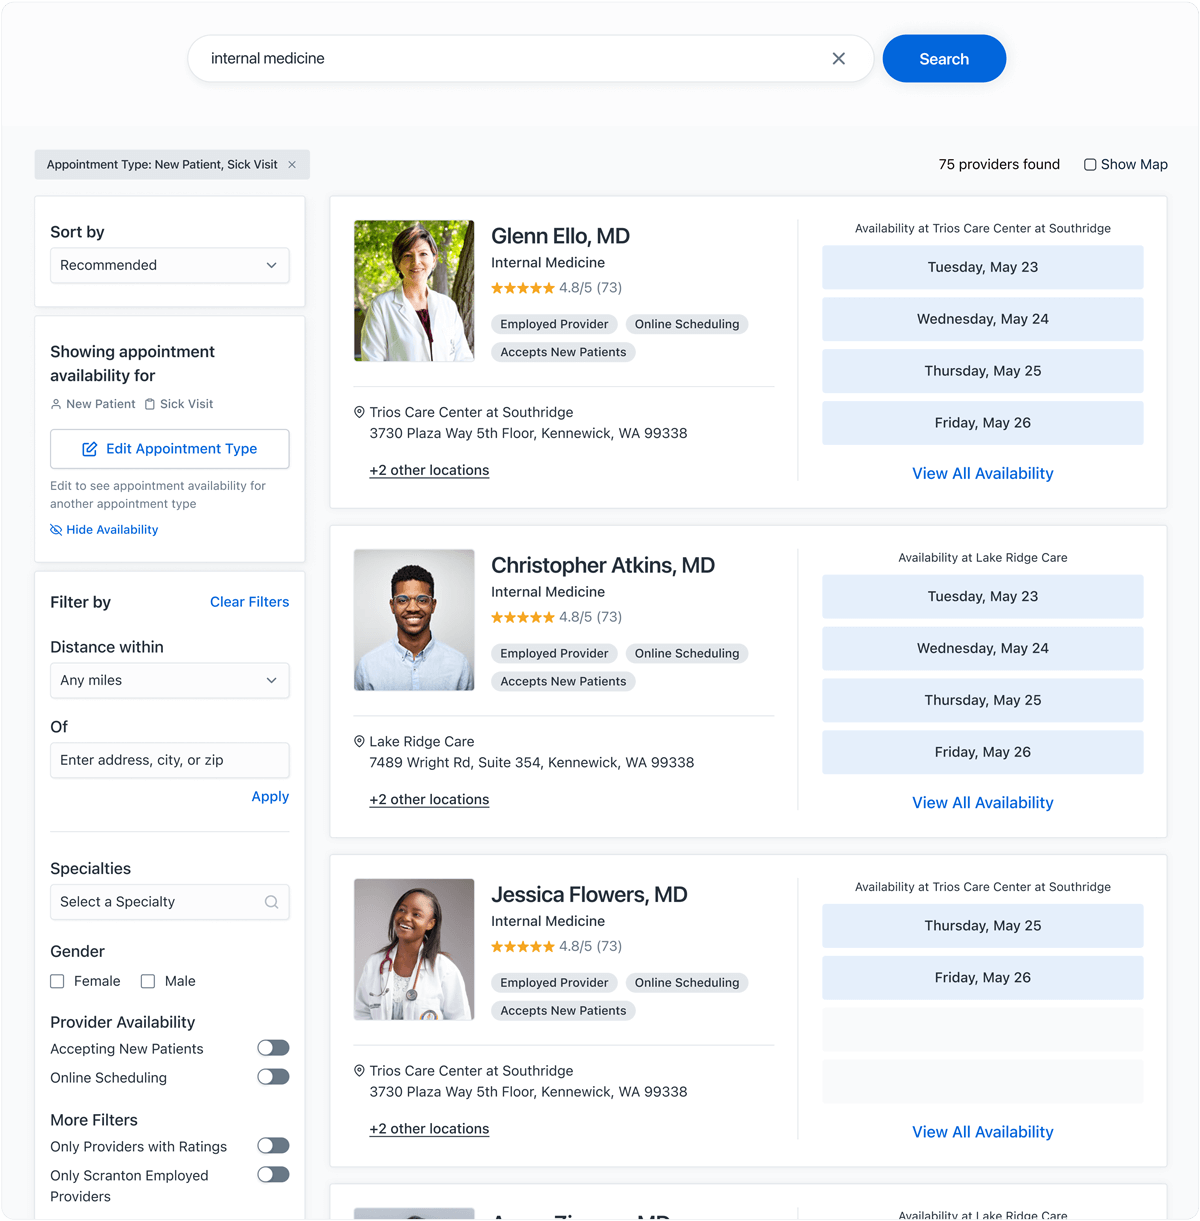 Search results after a specific search for "internal medicine", with additional filtering options and schedule built in for each listed care provider